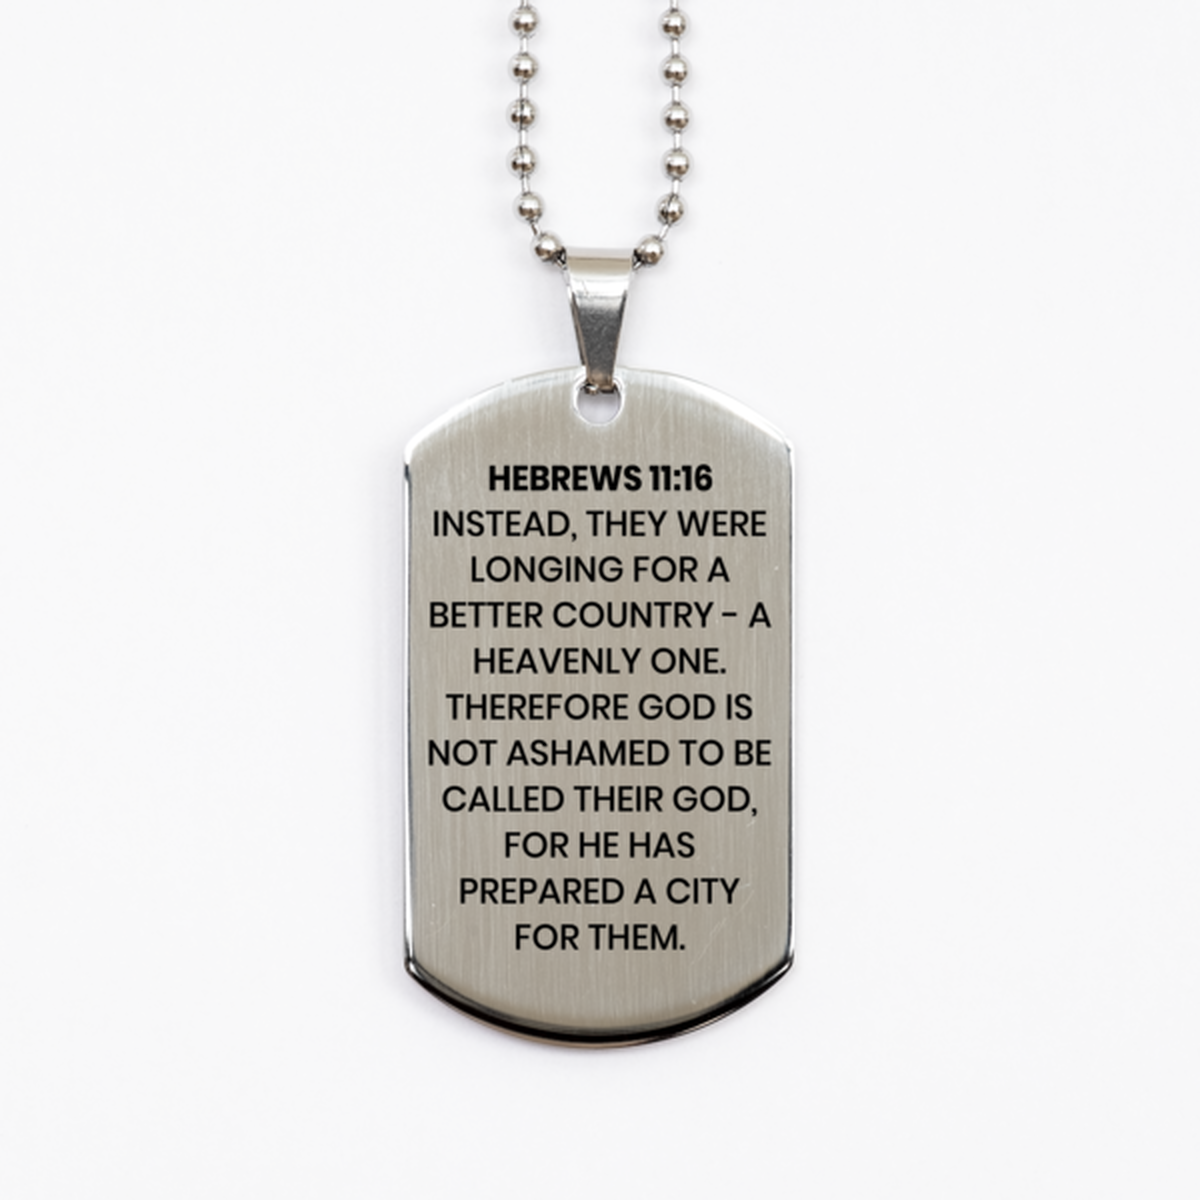 Hebrews 11:16 Necklace, Bible Verse Necklace, Christian Necklace, Christian Birthday Gift, Stainless Steel Dog Tag Necklace, Gift for Christian.